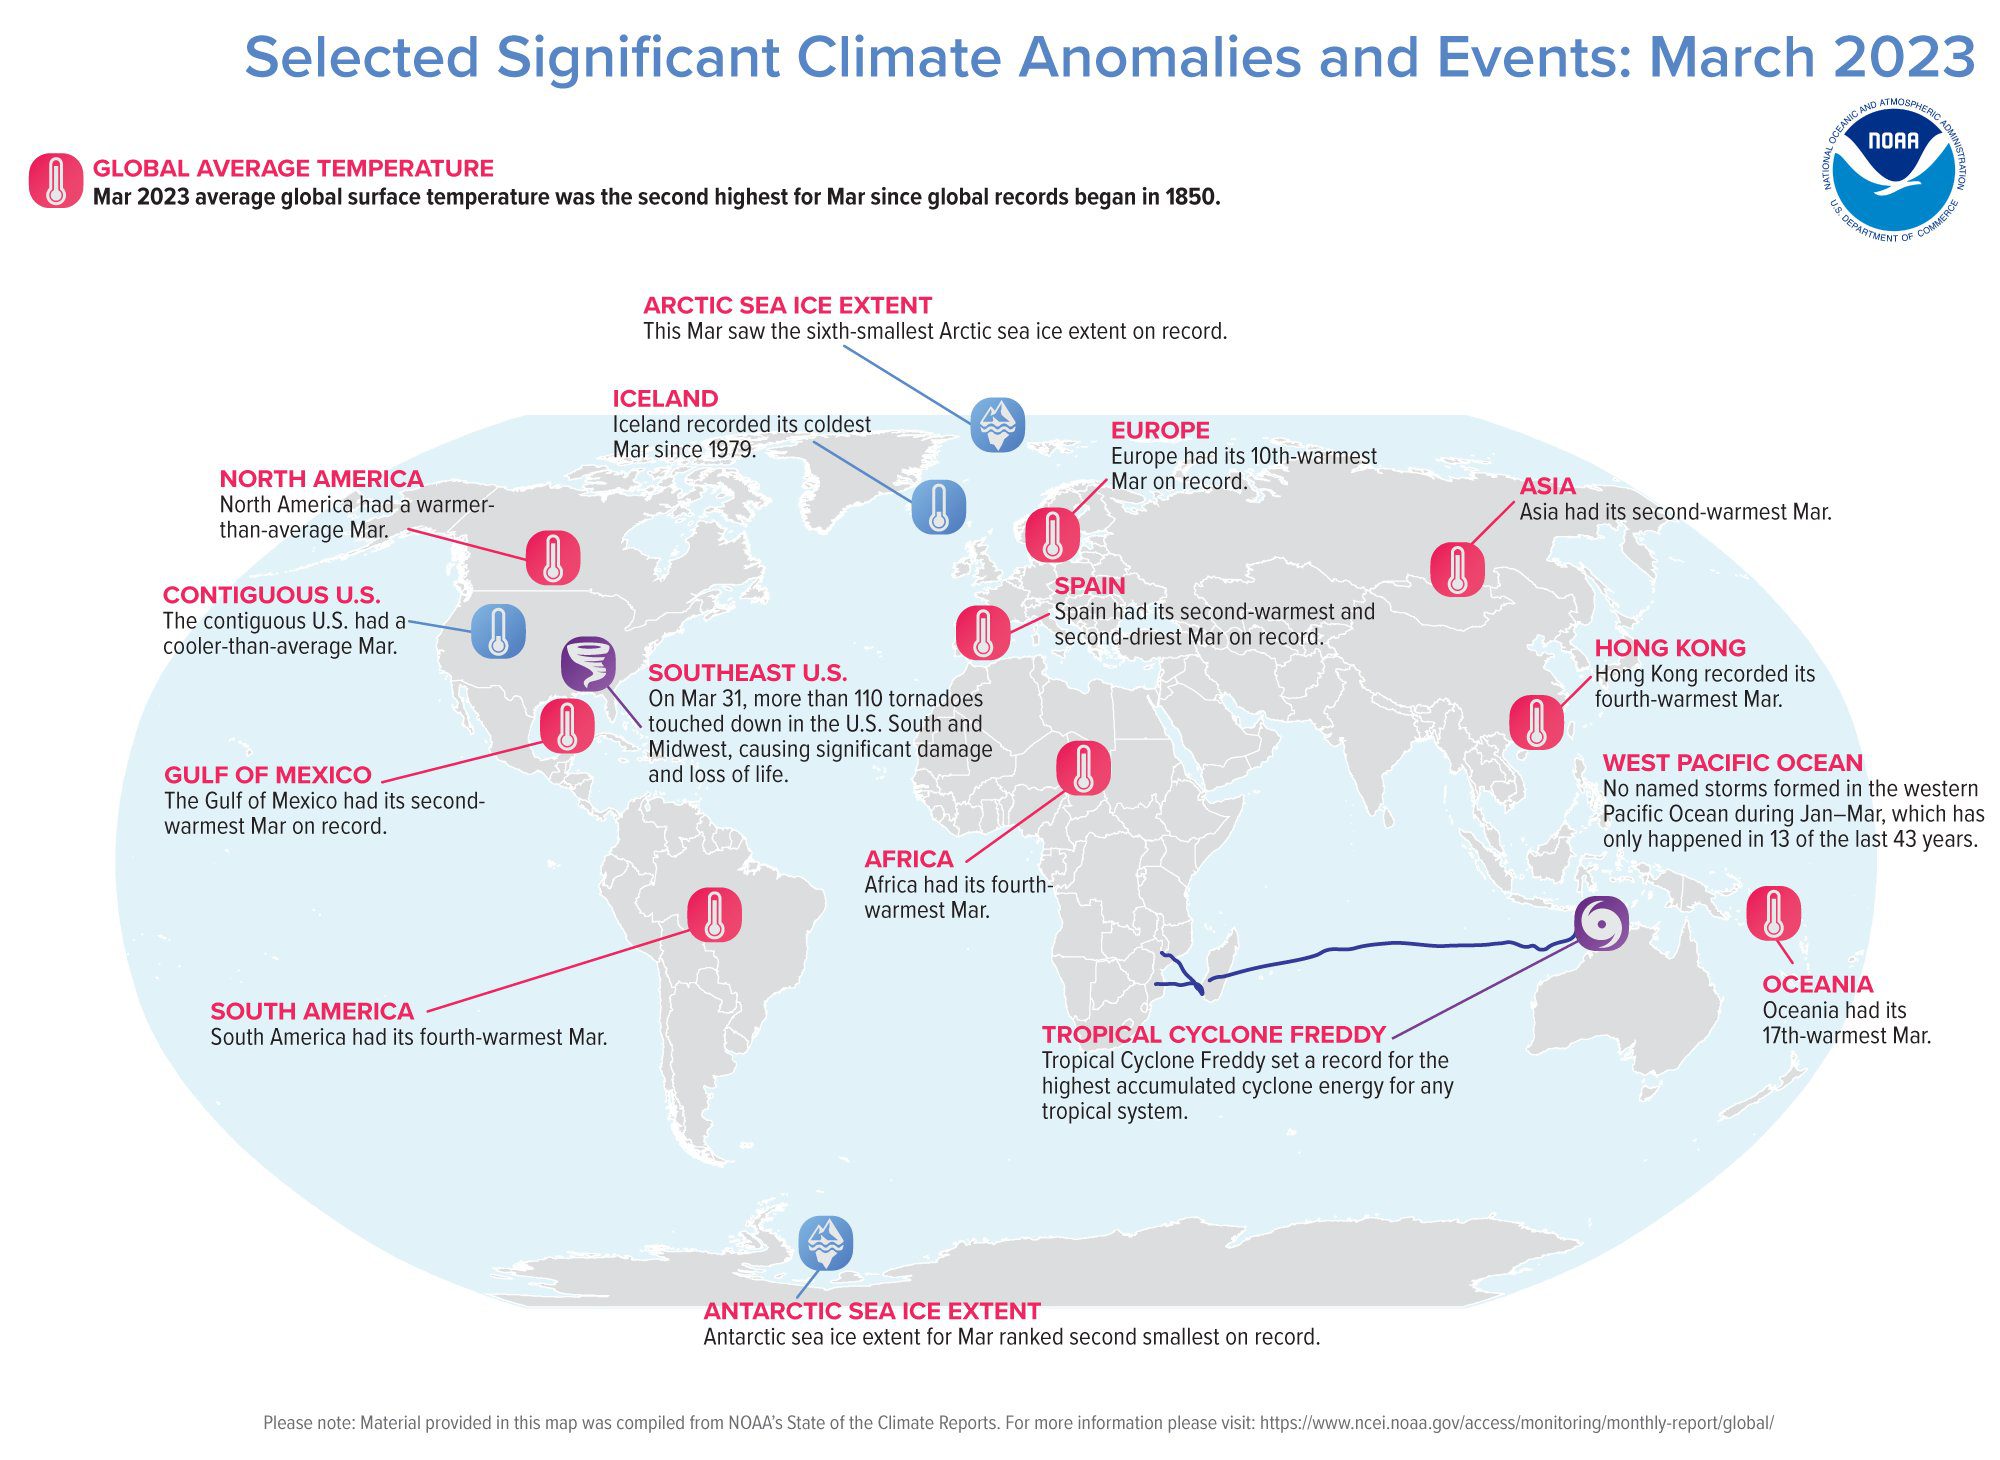 Climate anomalies and events from March 2023.